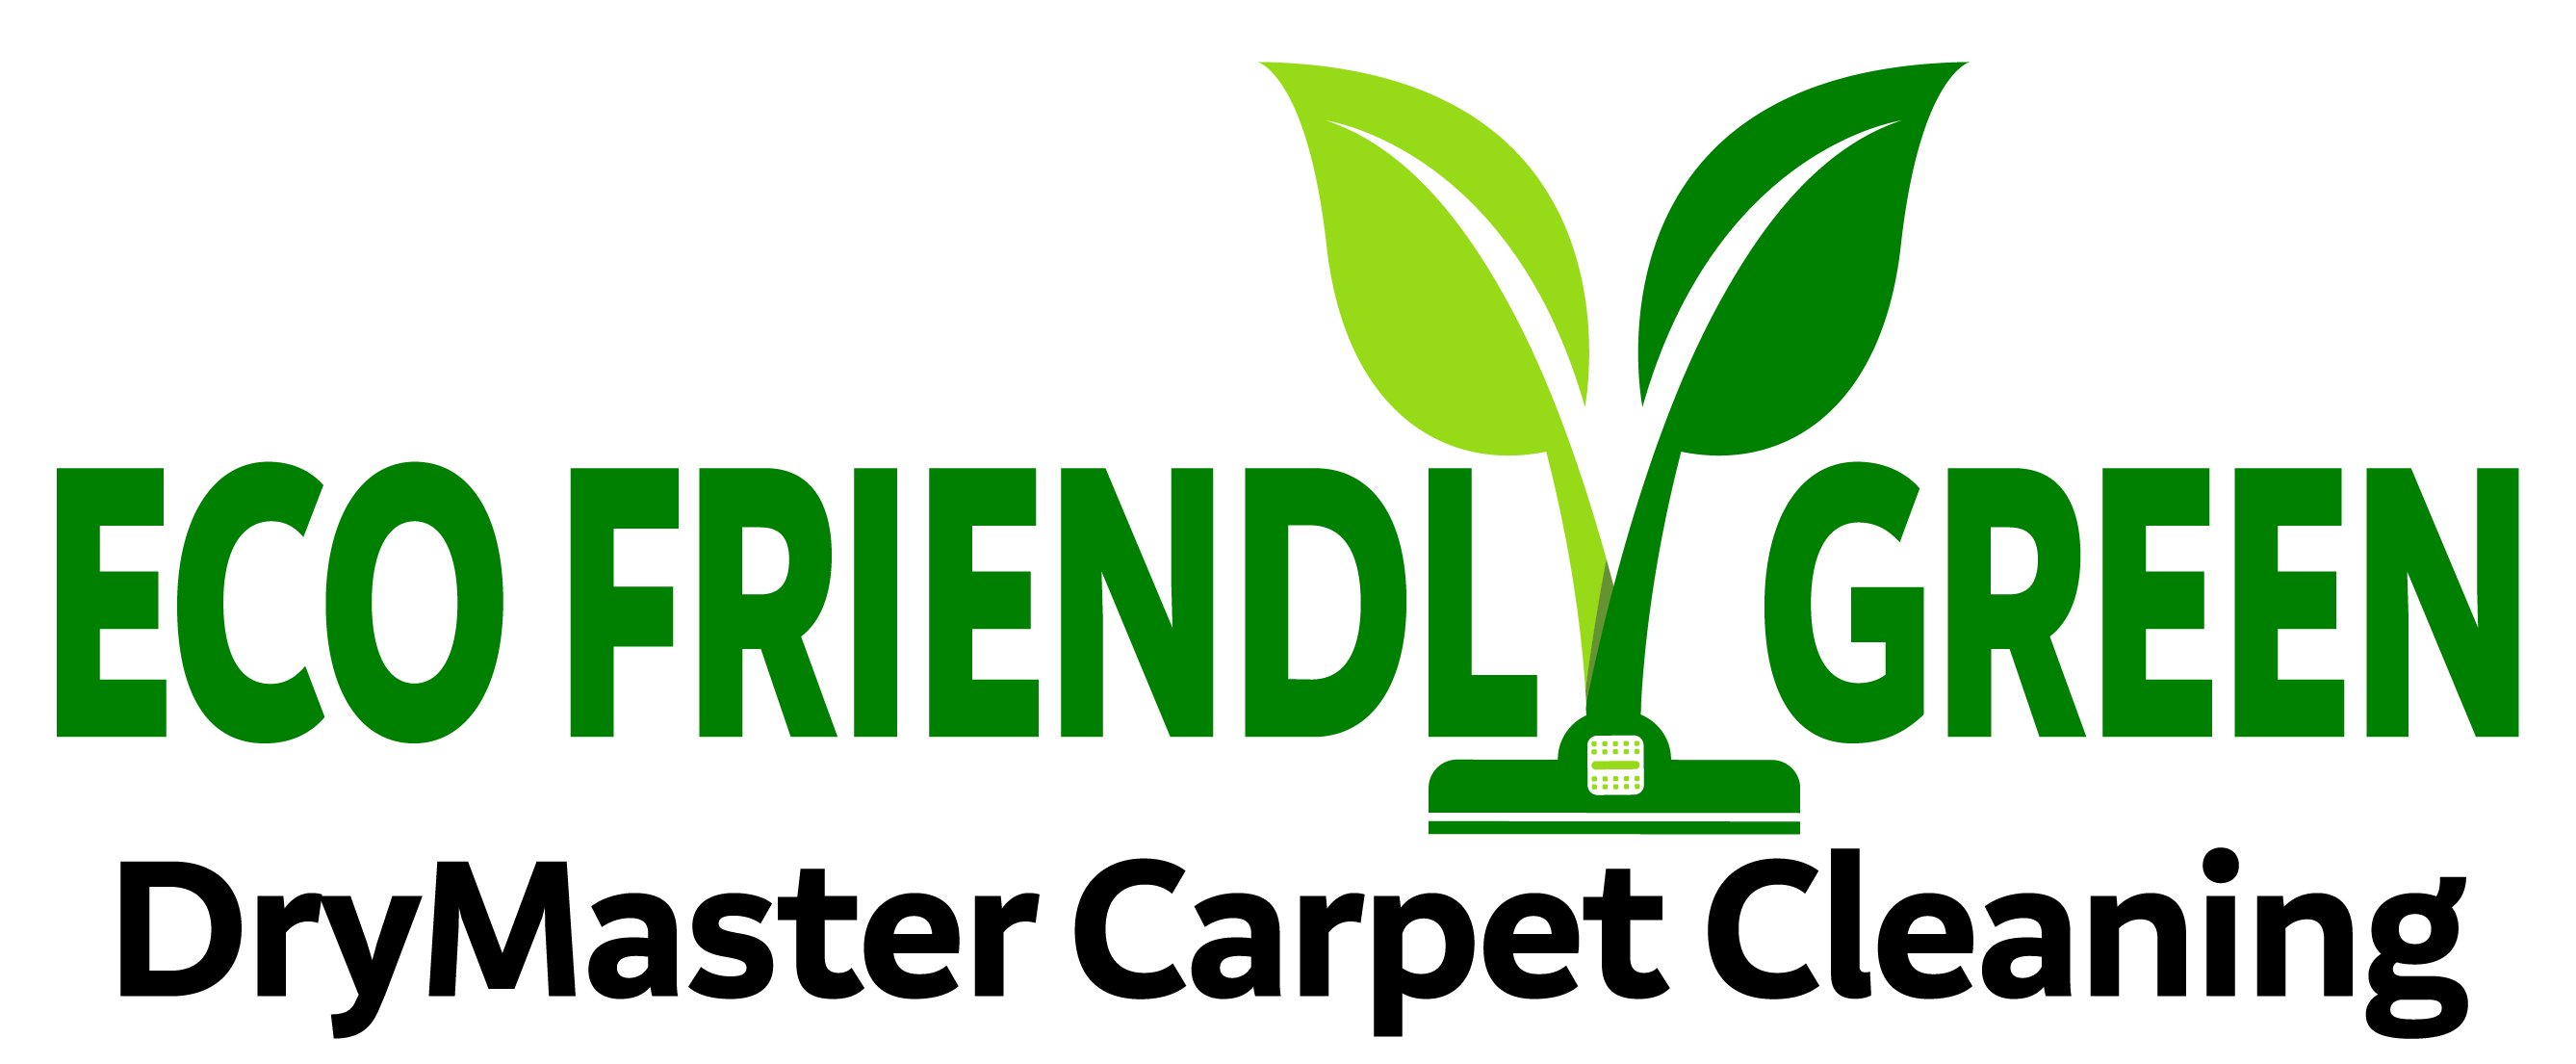 How to Remove Paint from carpet - DryMaster Systems, Inc.